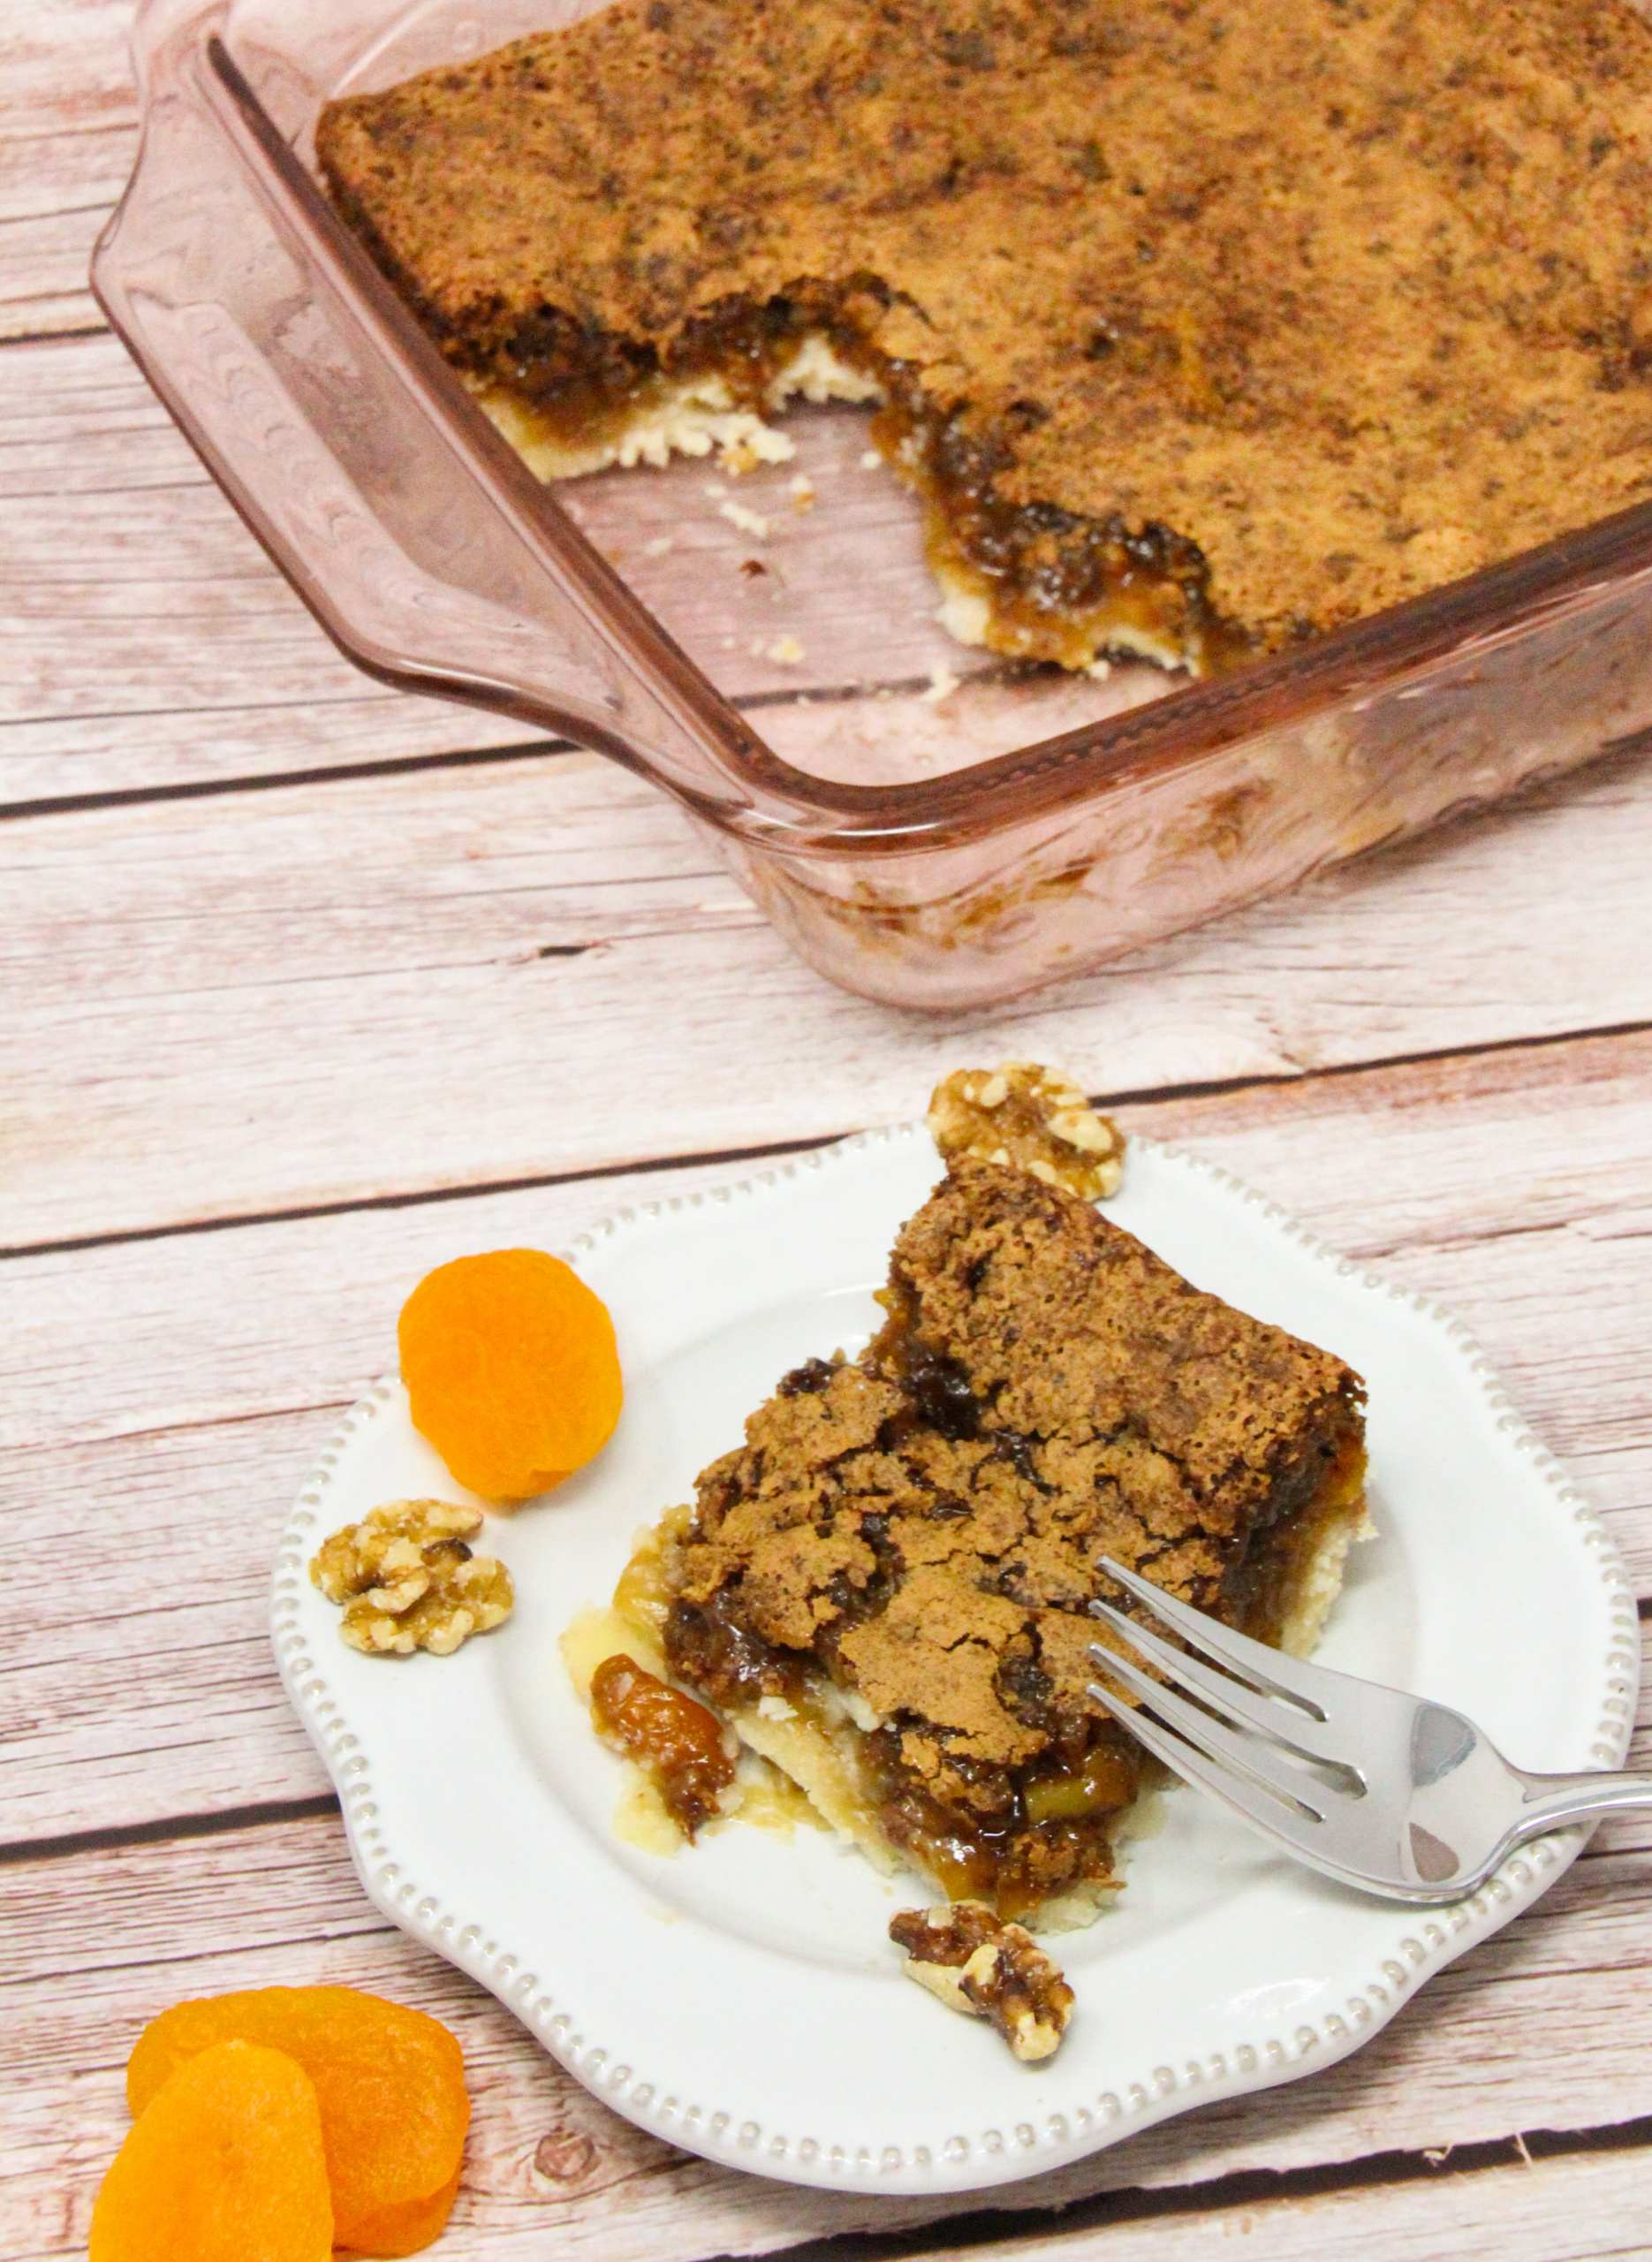 Apricot Squares start with a buttery base crust, and the filling is ooey-gooey and rich thanks to a generous portion of brown sugar, walnuts, and apricots. Recipe shared with permission granted by Barbara Ross, author of HIDDEN BENEATH. 